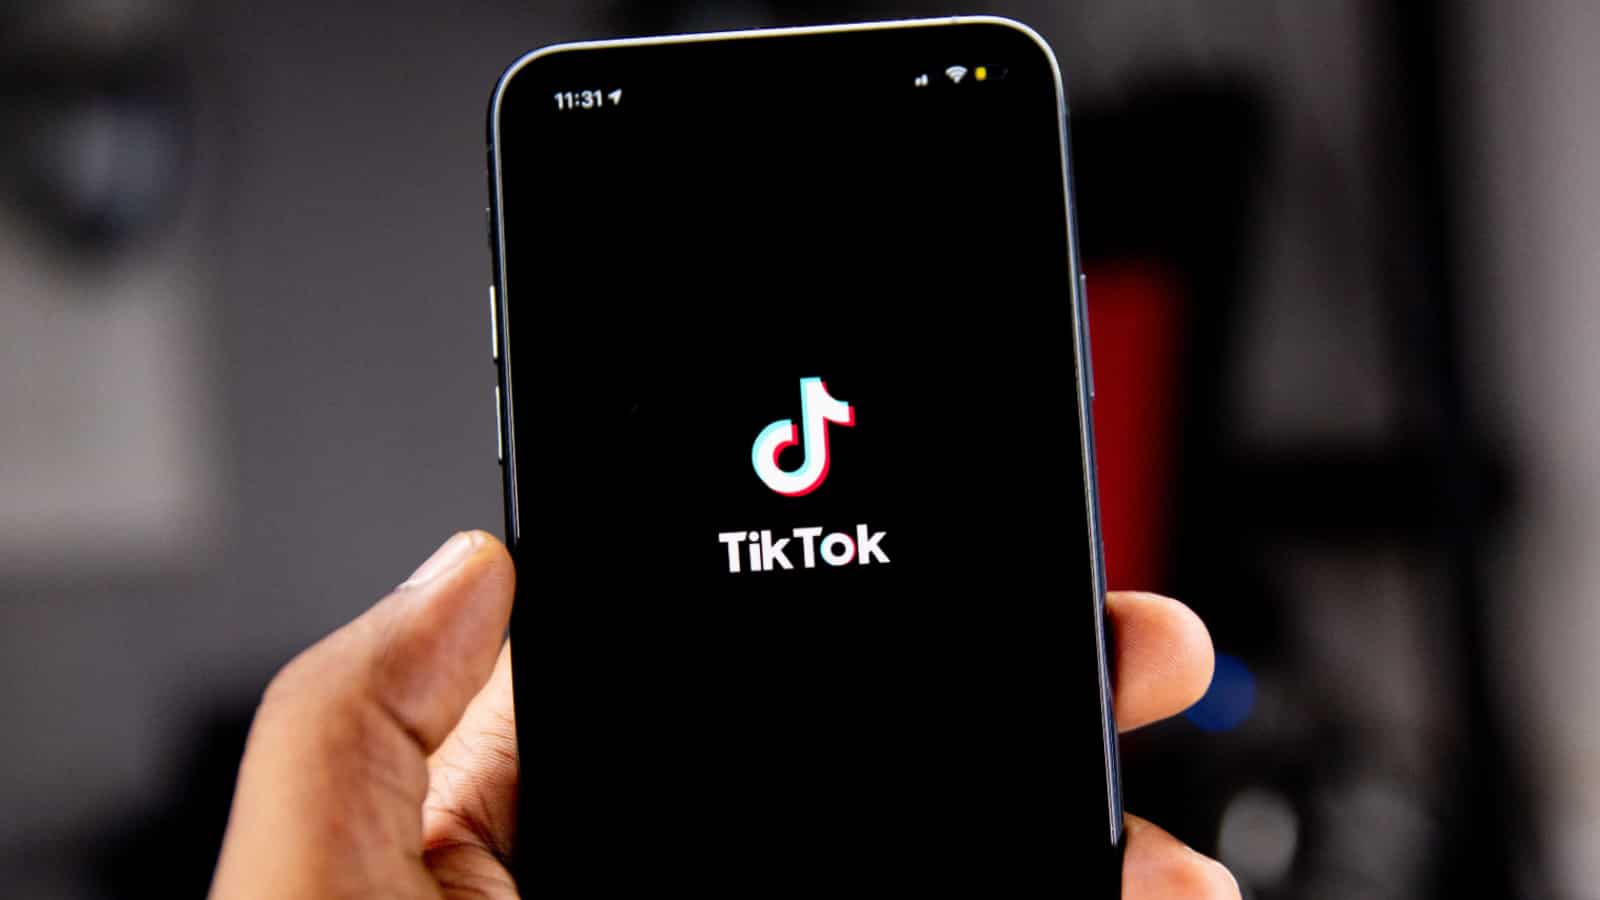 How to upload a video from your camera roll to TikTok 